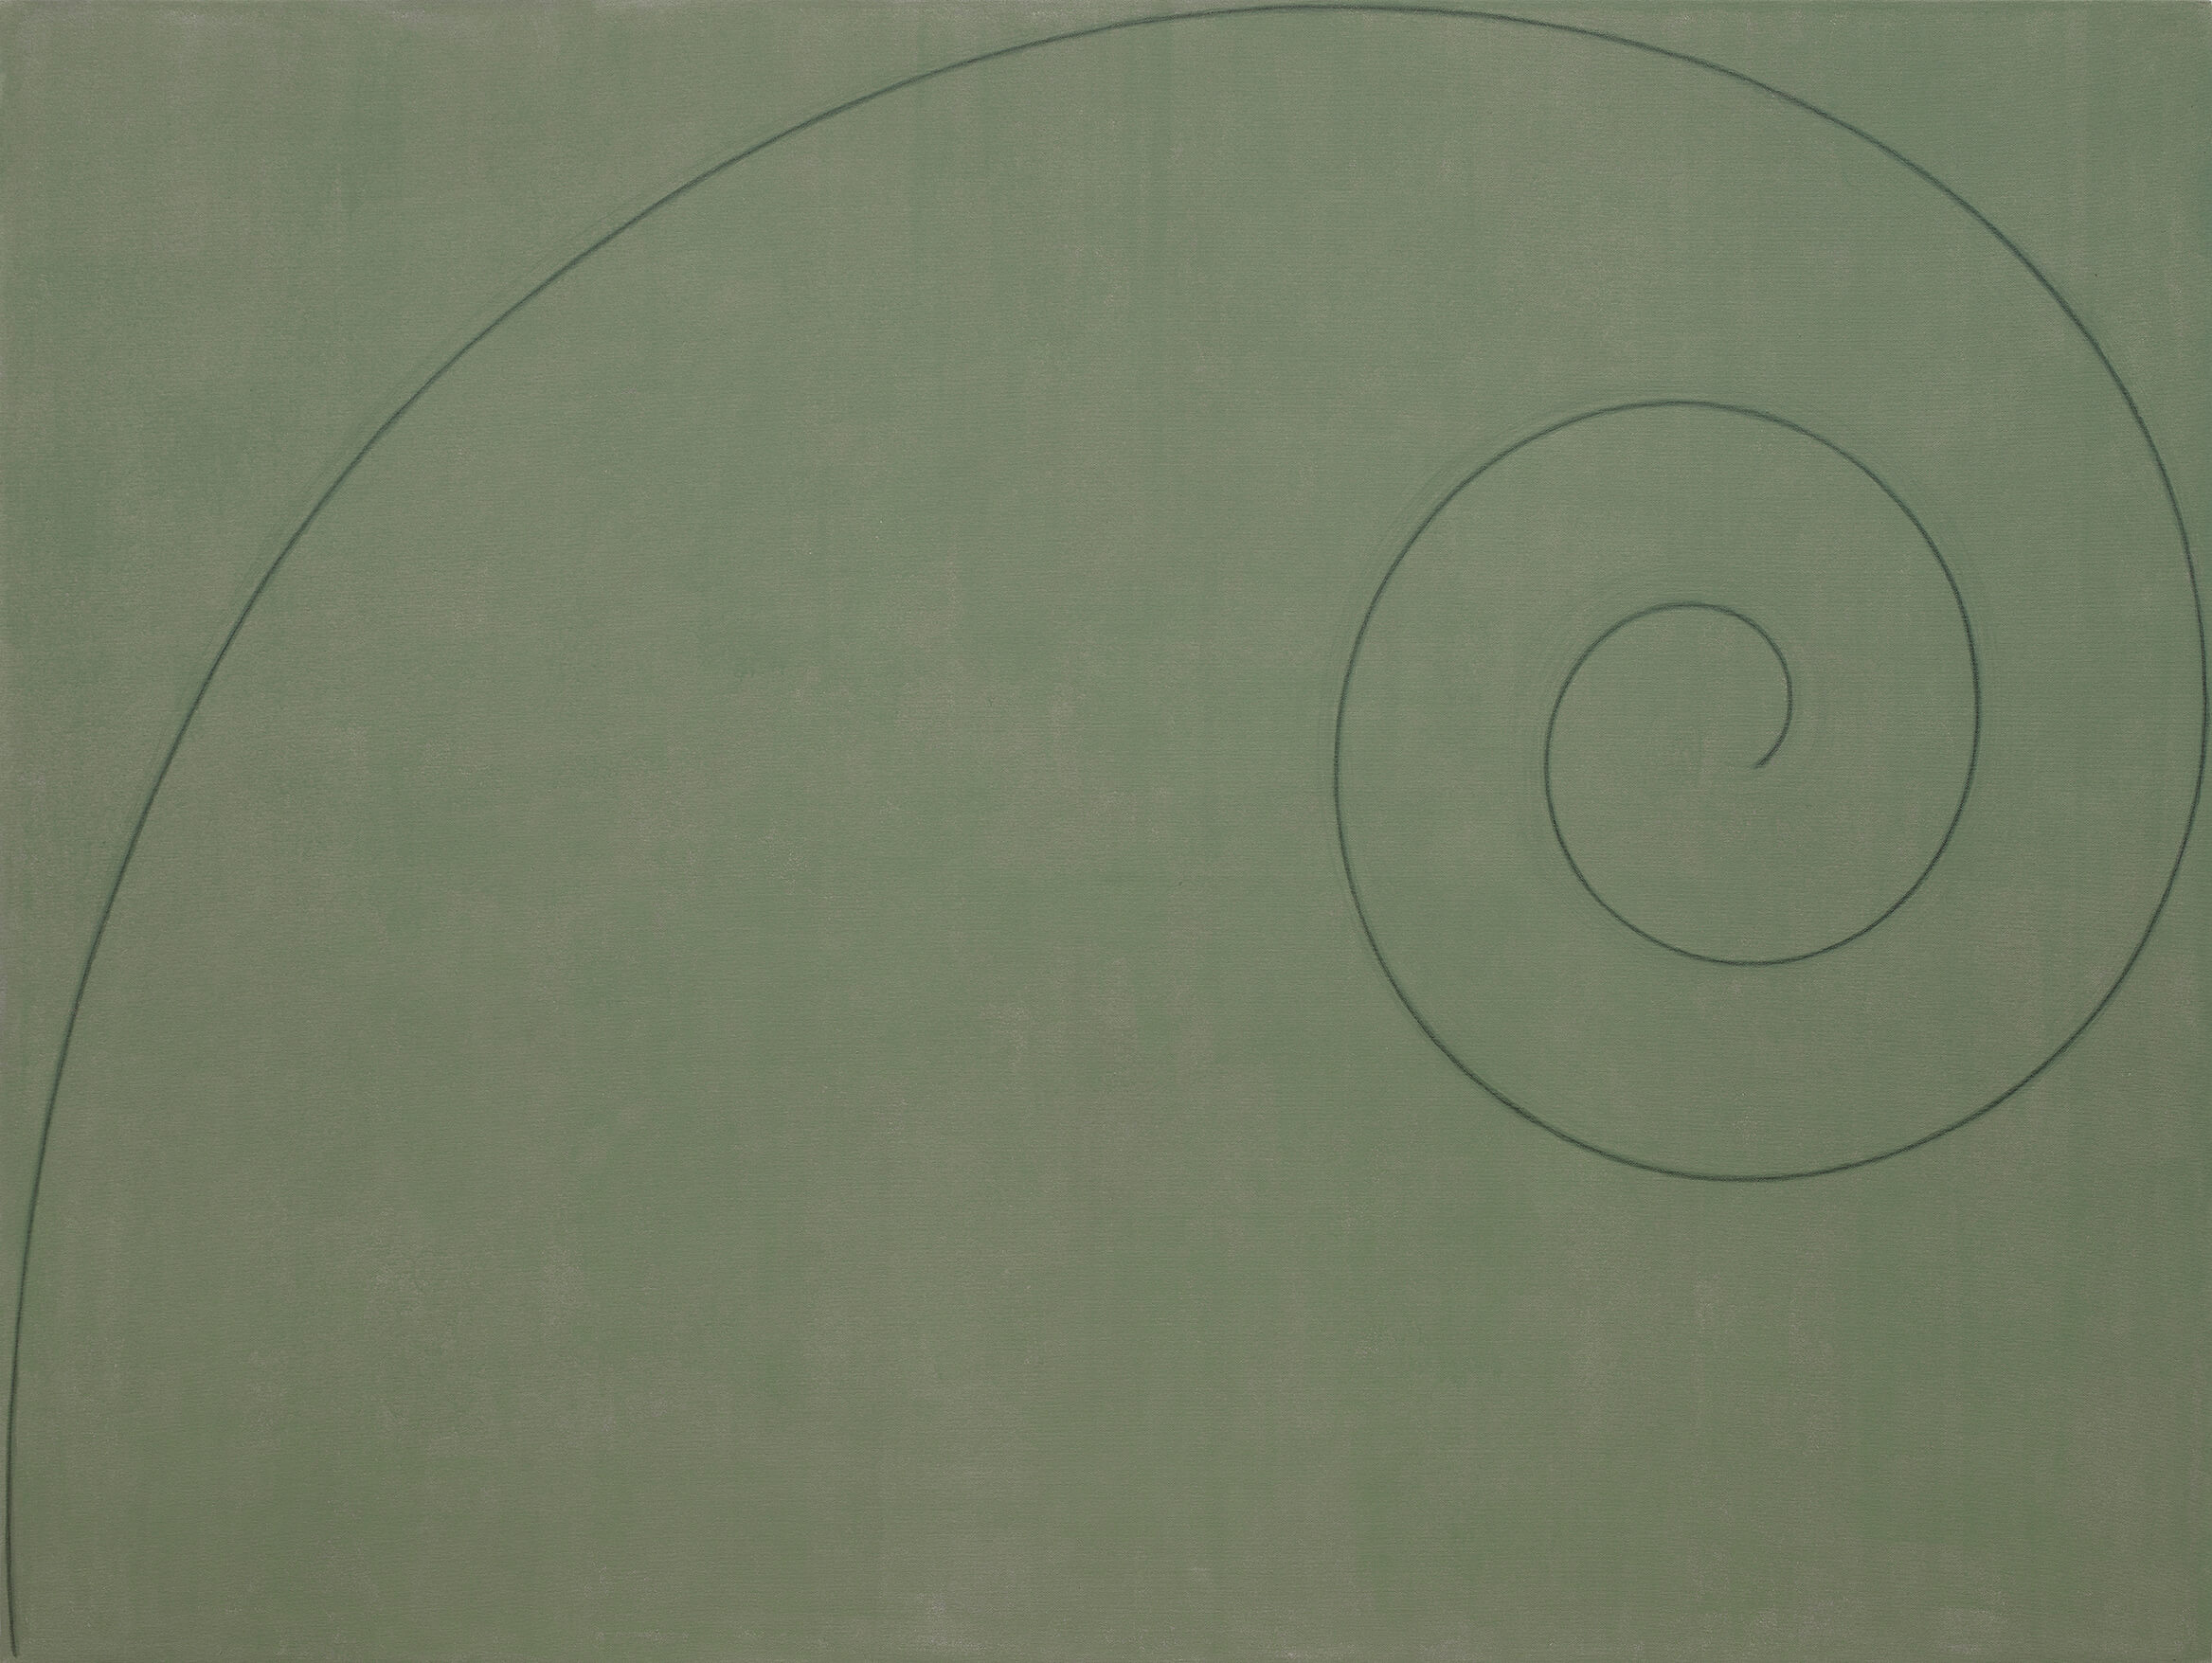 Robert Mangold Curled Figure IV, 2000 acrylic and black pencil on canvas 58 x 78 1/4 in. (147.3 x 198.8 cm.)